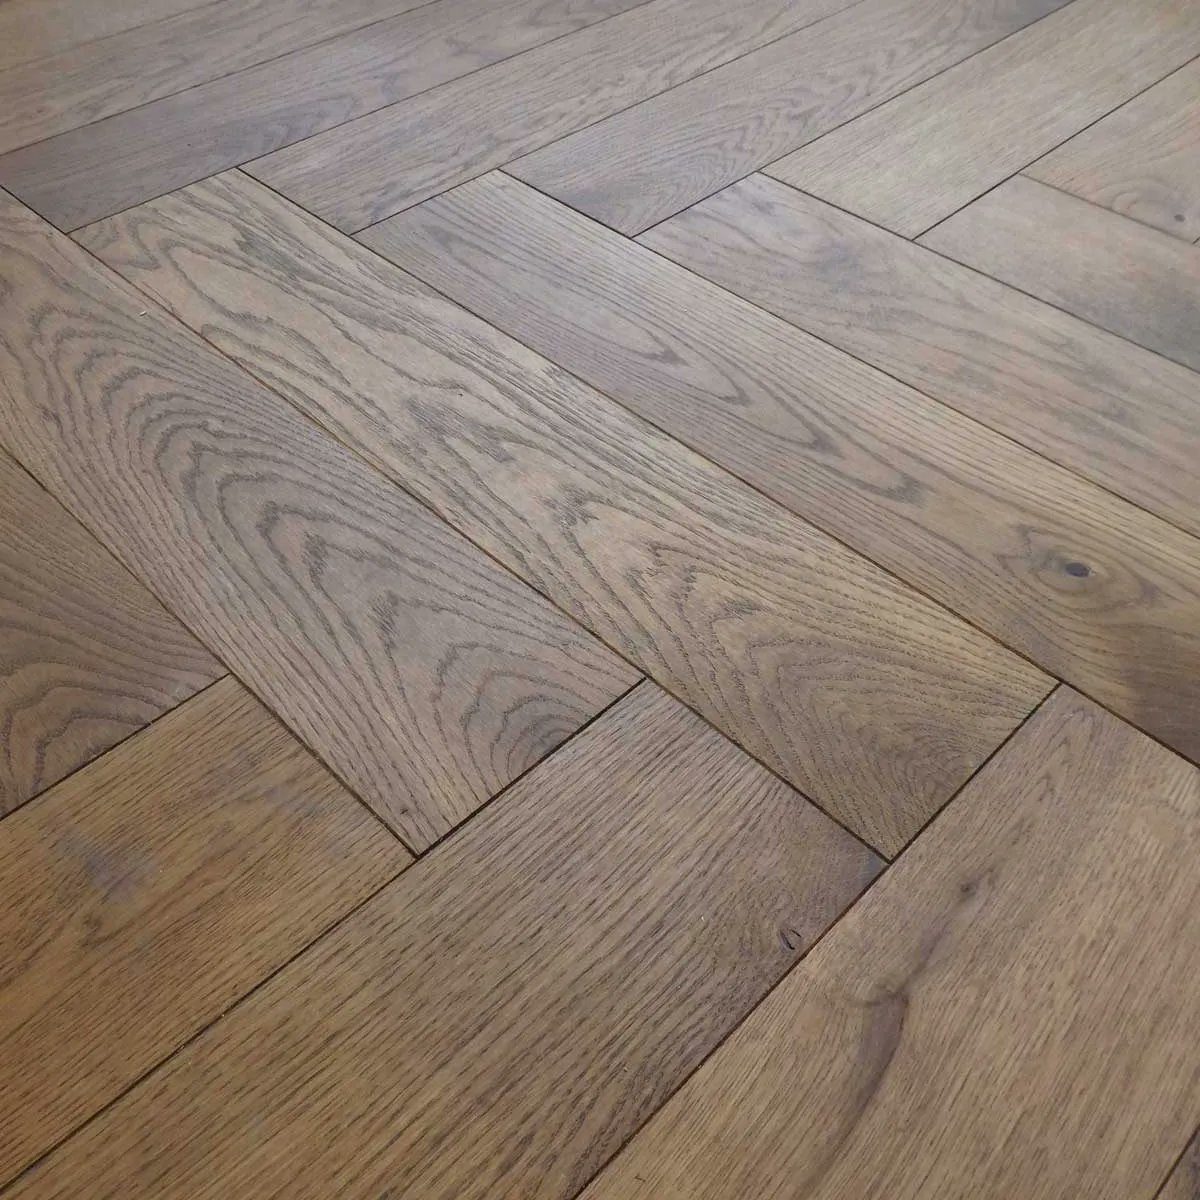 PARQUET Parquet wood flooring is a great way to introduce subtle, stylish and timeless pattern into your home. buff.ly/3ew2eDE #arlberrybespoke #bespokeinteriors #parquet #herringbone #chevron #woodfloors #woodflooringexpert #woodflooring